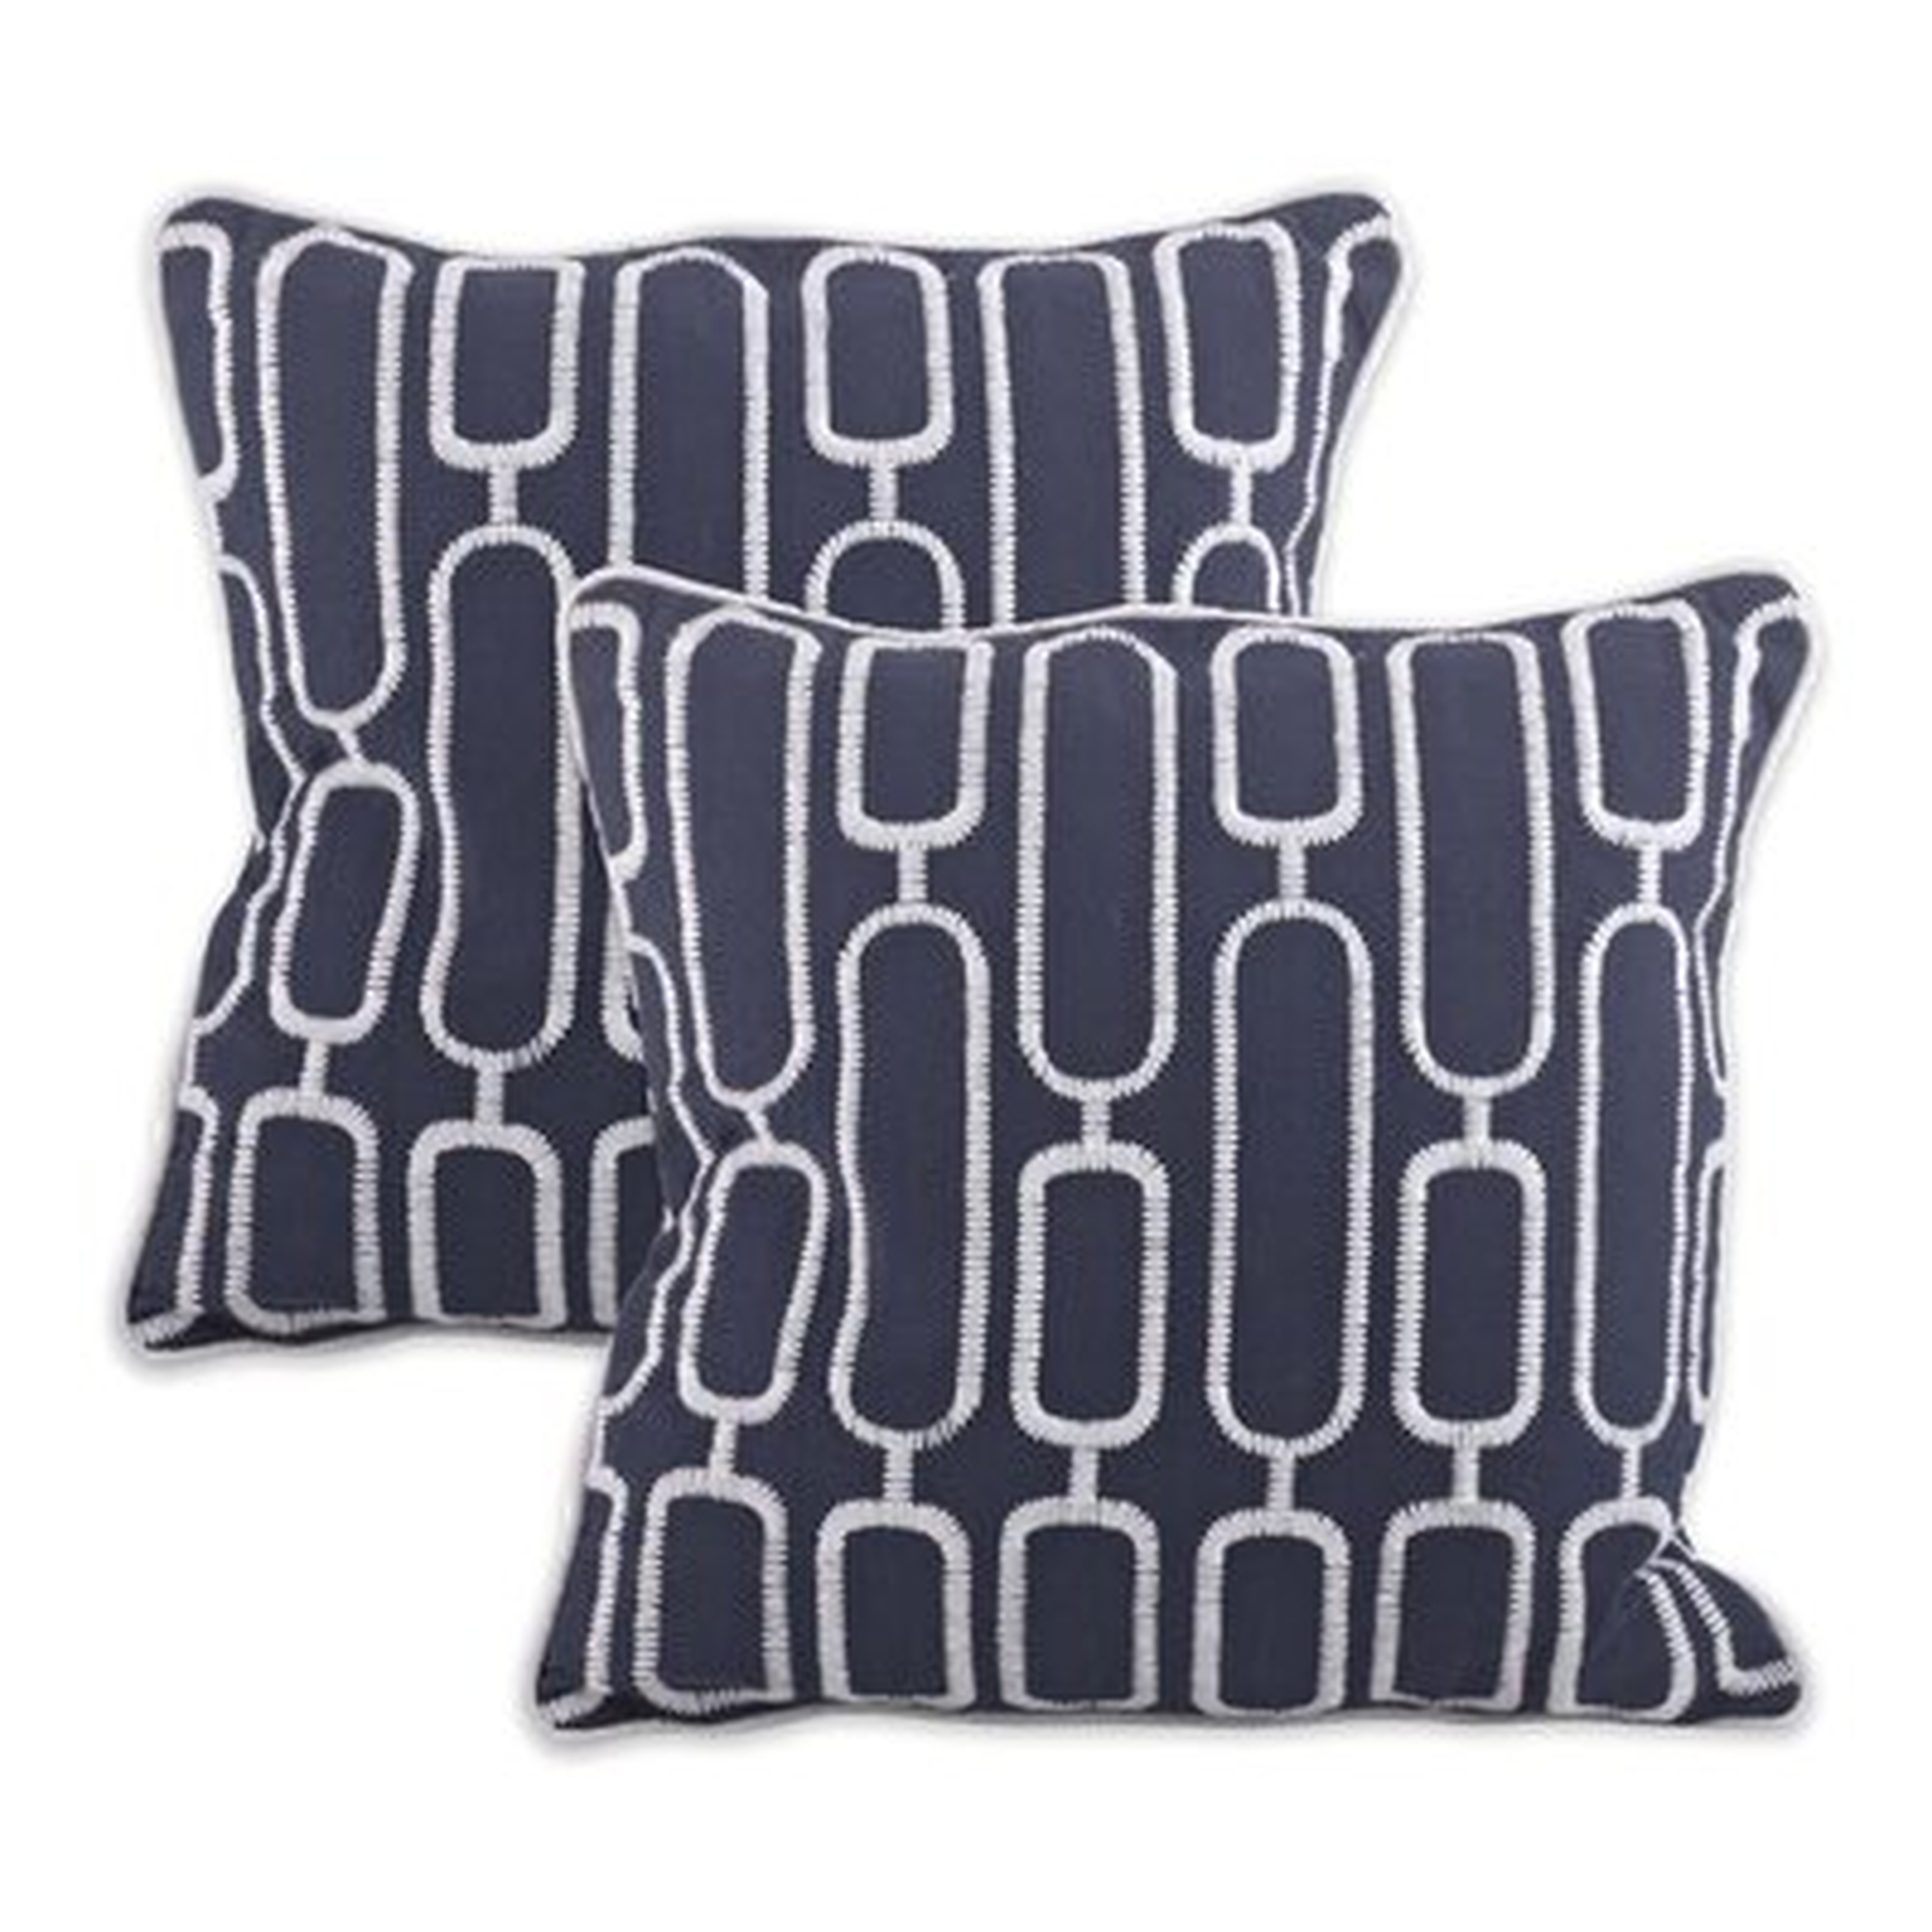 Embroidered Chain Design Throw Pillow Cover (Set Of 2) - Wayfair